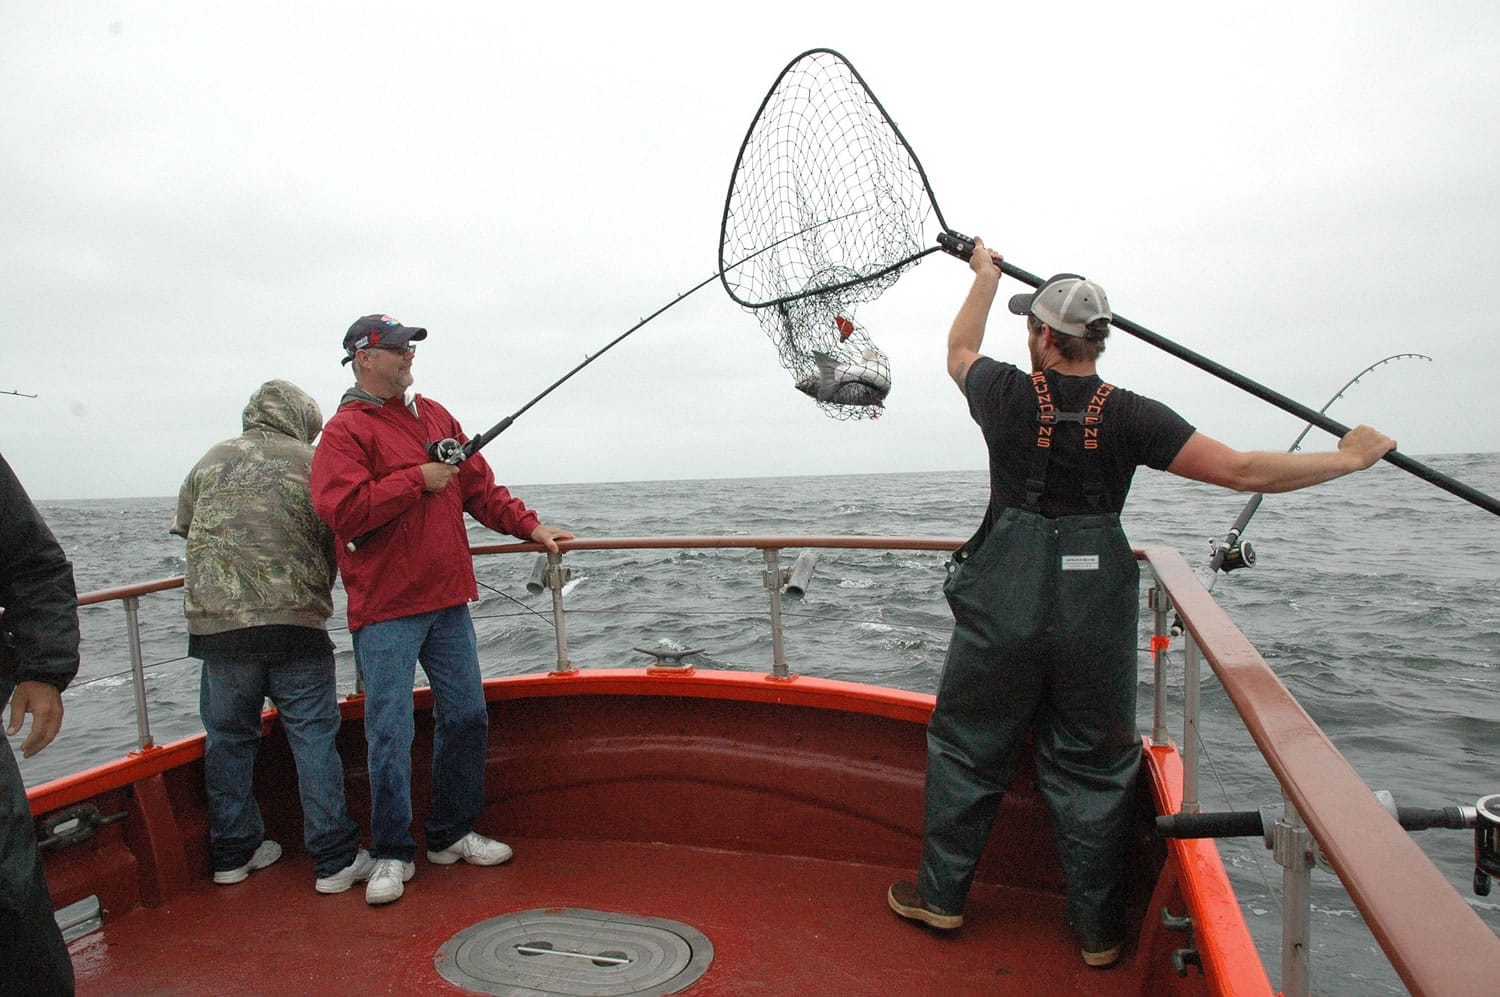 Deckhand Donald Pitts nets a salmon for a charter angler off the Washington in 2014.